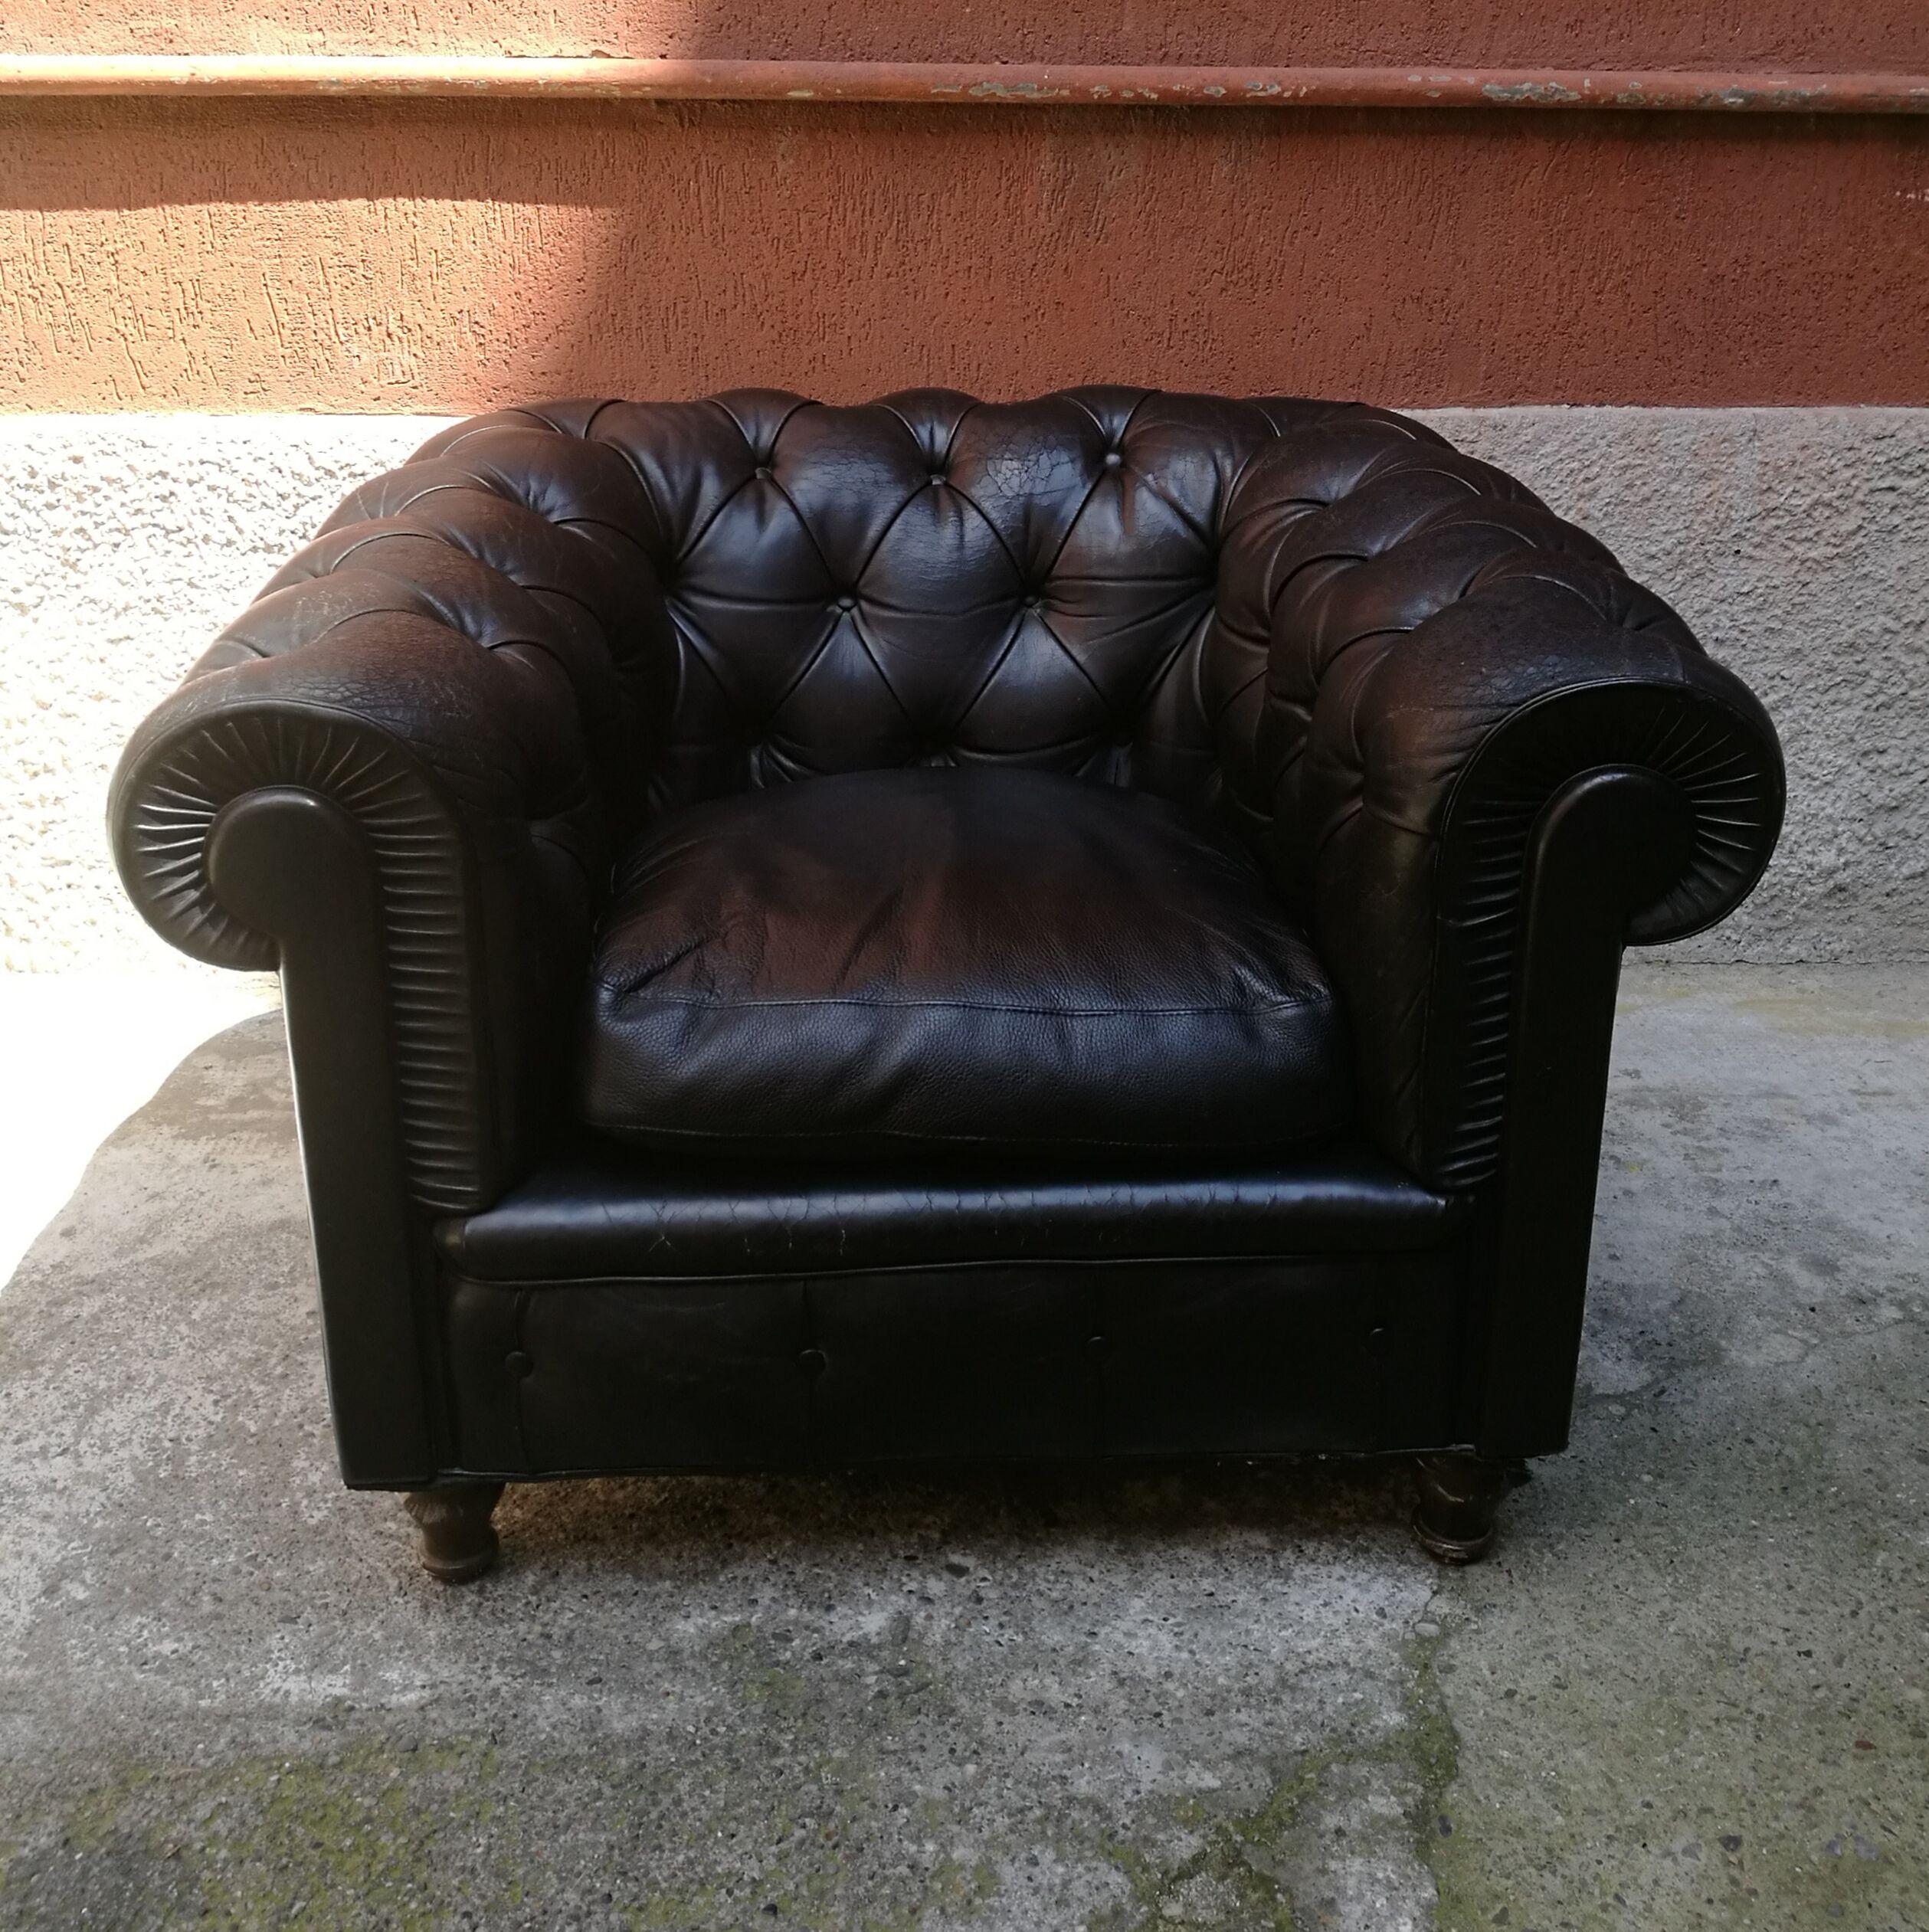 Black leather Italian Chester Poltrona Frau original armchairs from 1960 period
One beautiful 1960 period armchair, from the Italian company Poltrona Frau, Chester model.
This armchair its original from the 1960 and have the original metal label